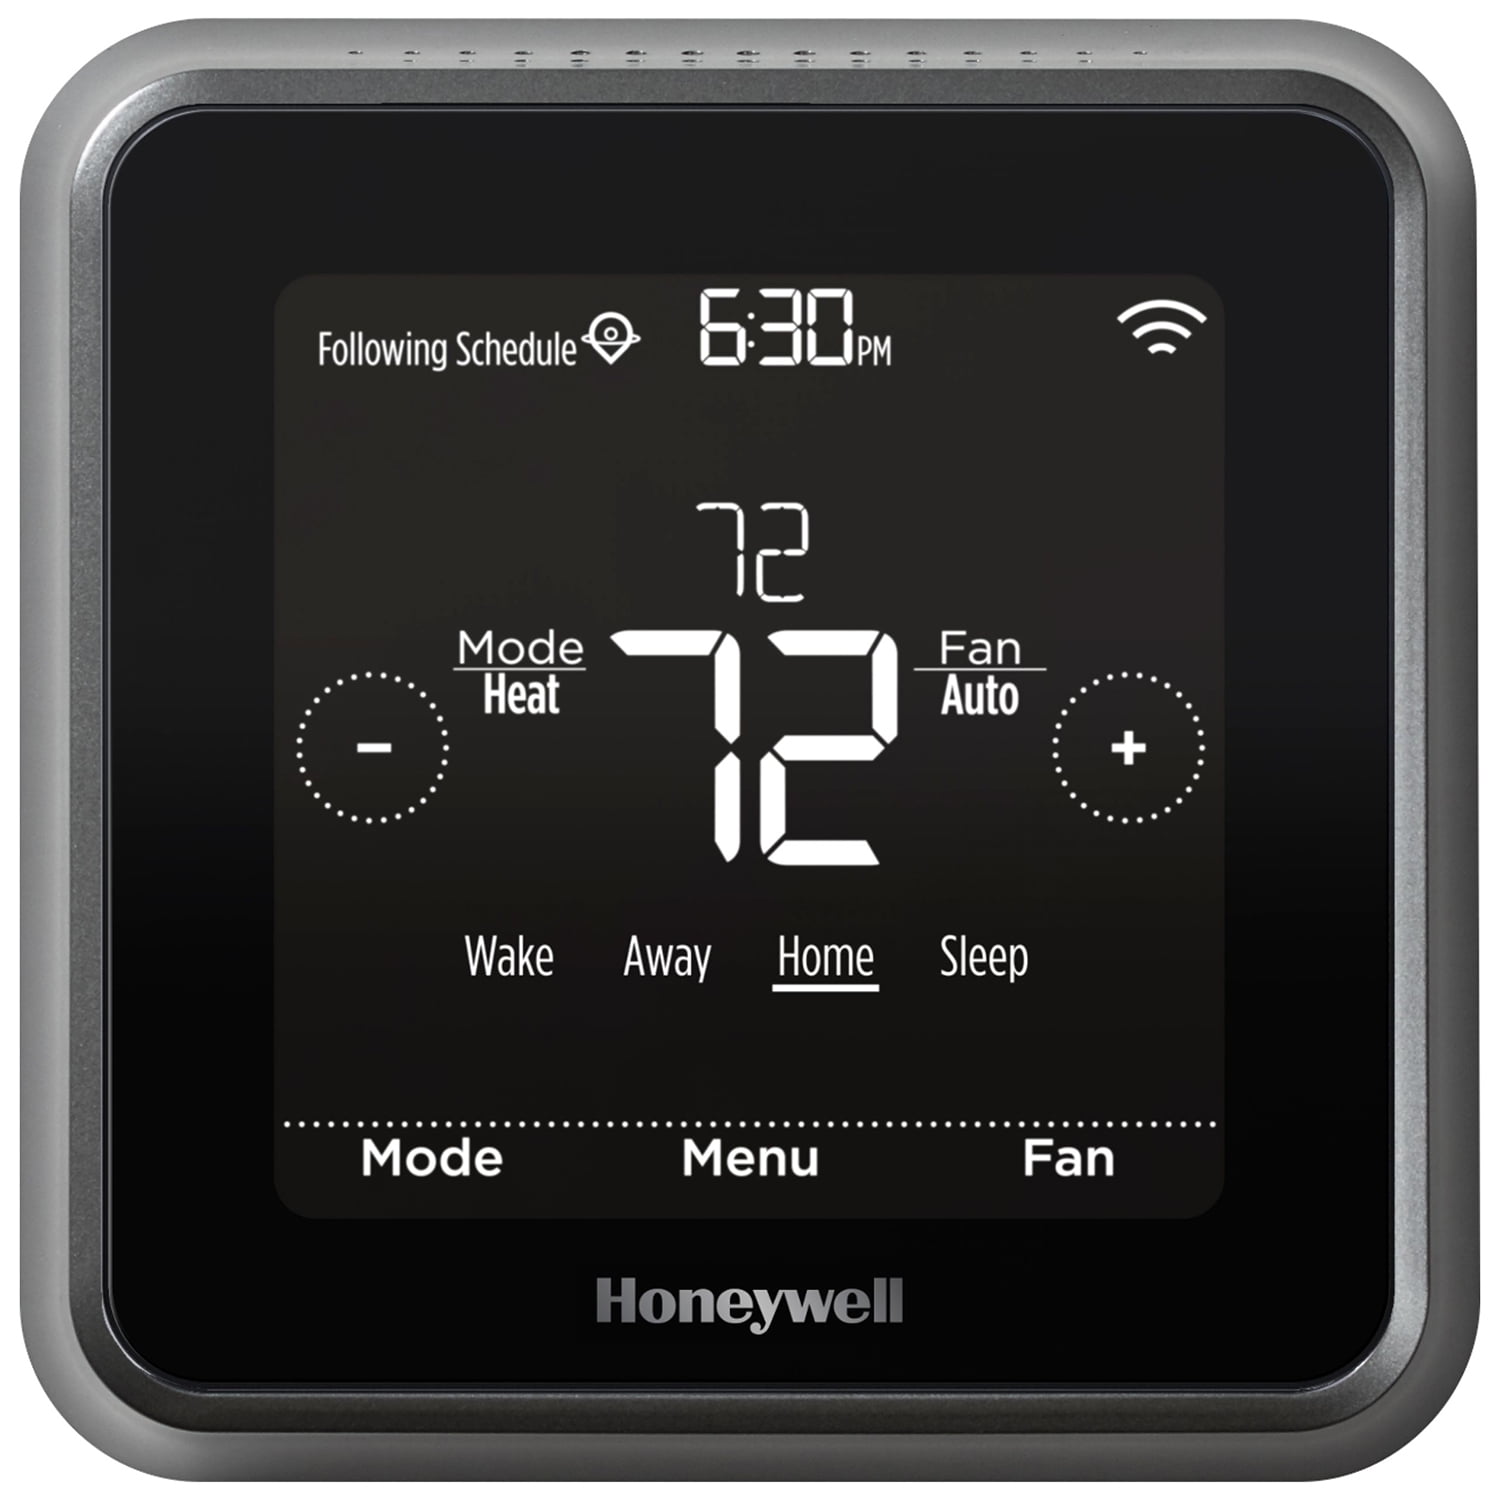 for sale online TH9320WF5003 Honeywell Wi-Fi 9000 7-Day Programmable Thermostat 